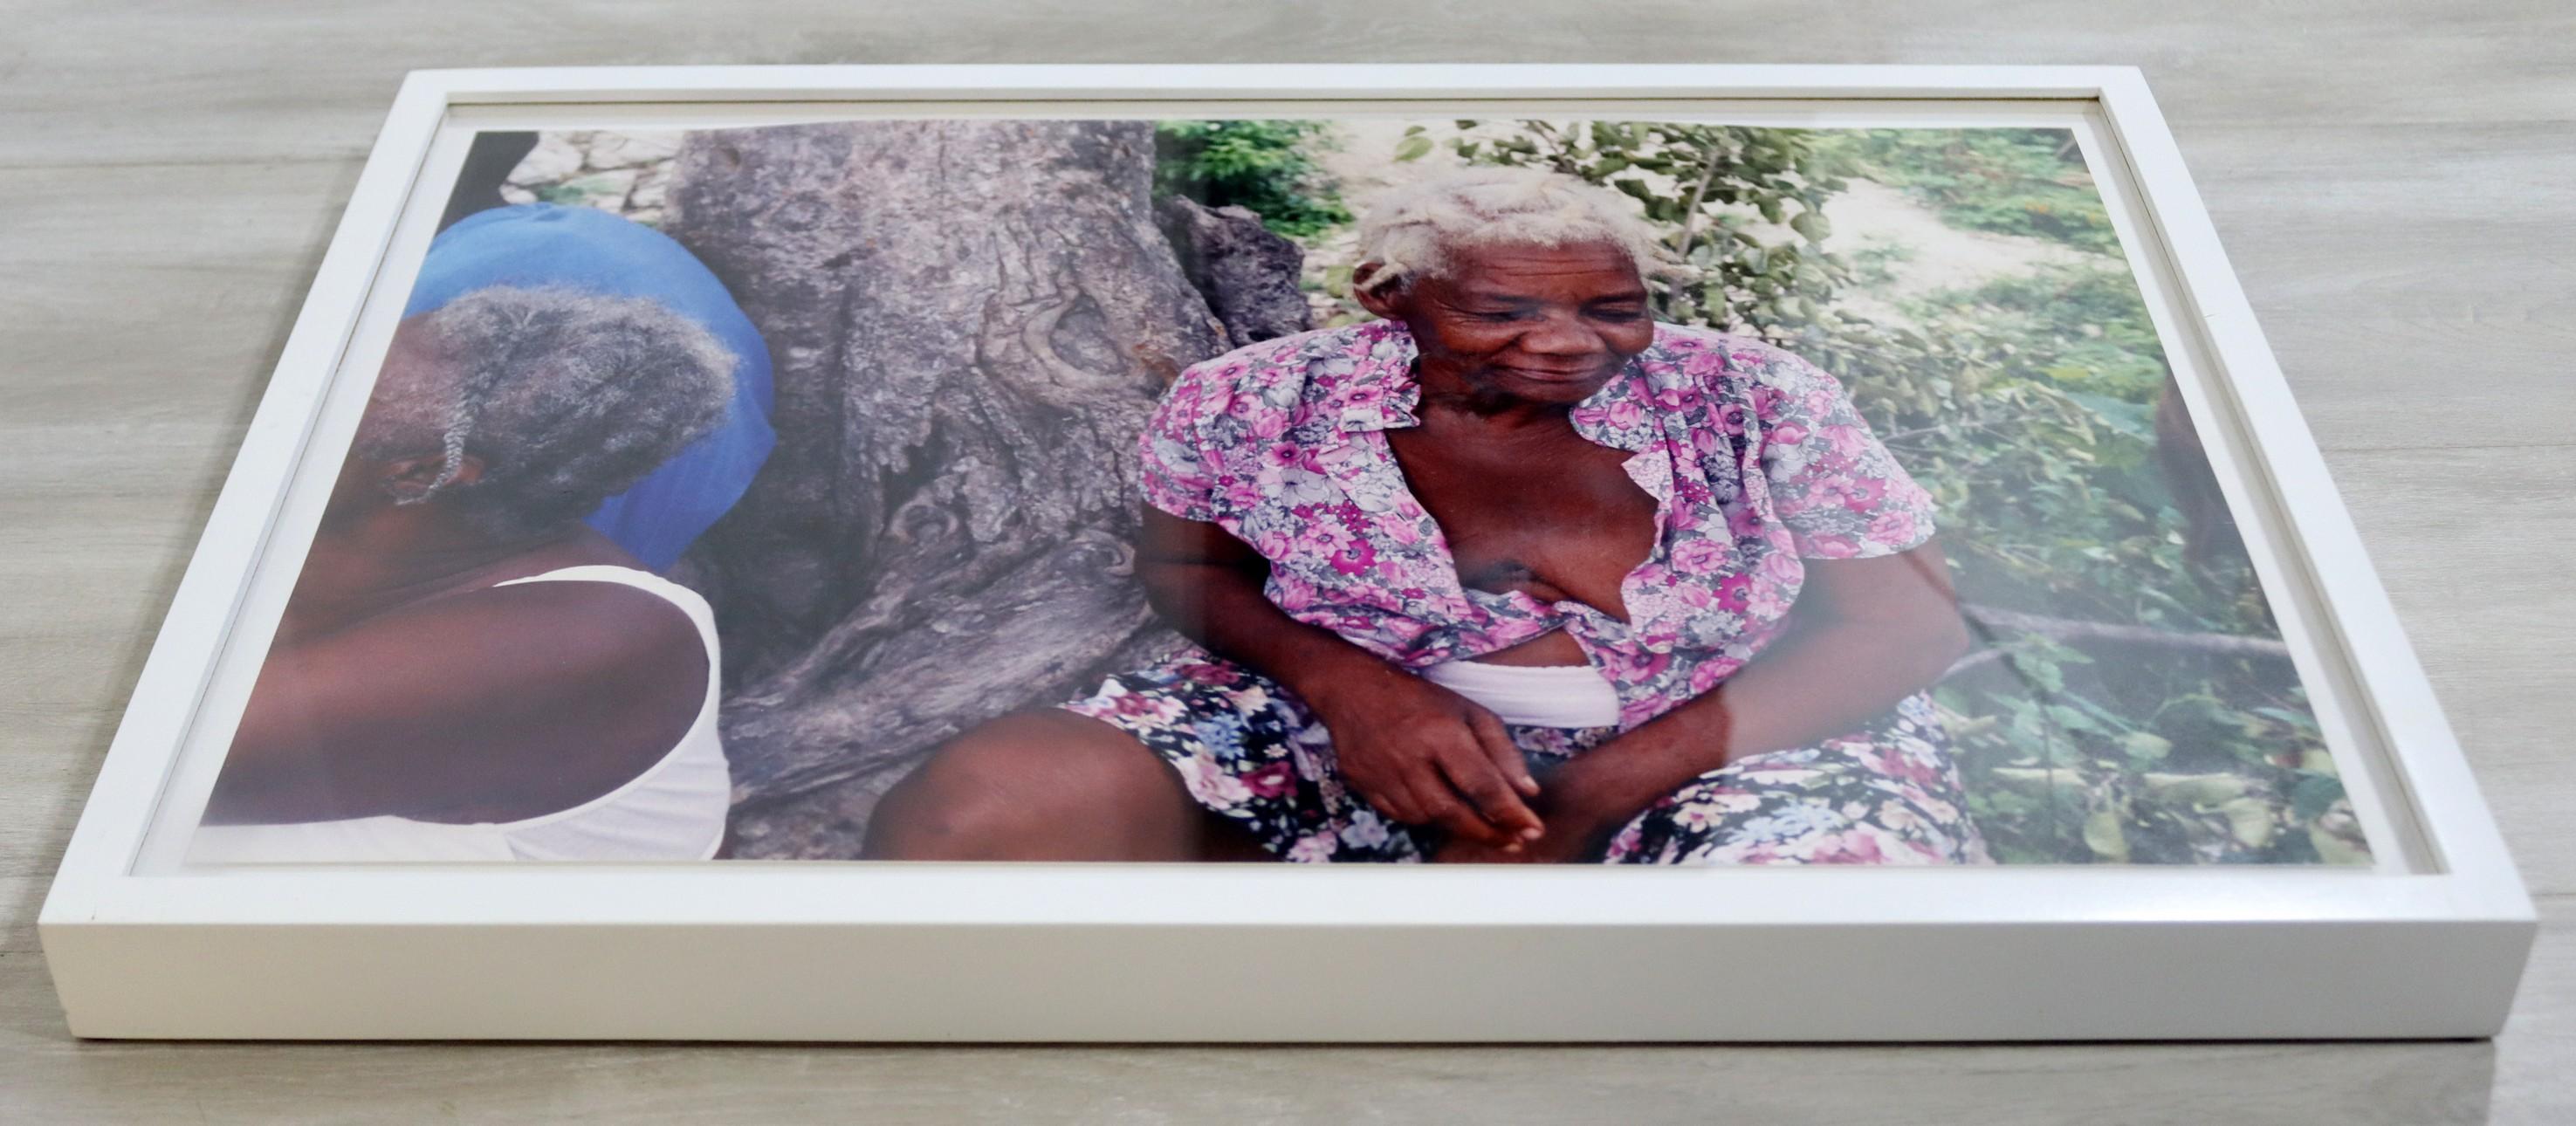 Chantal James Haiti Elderly Woman Photograph Framed Signed In Good Condition For Sale In Keego Harbor, MI